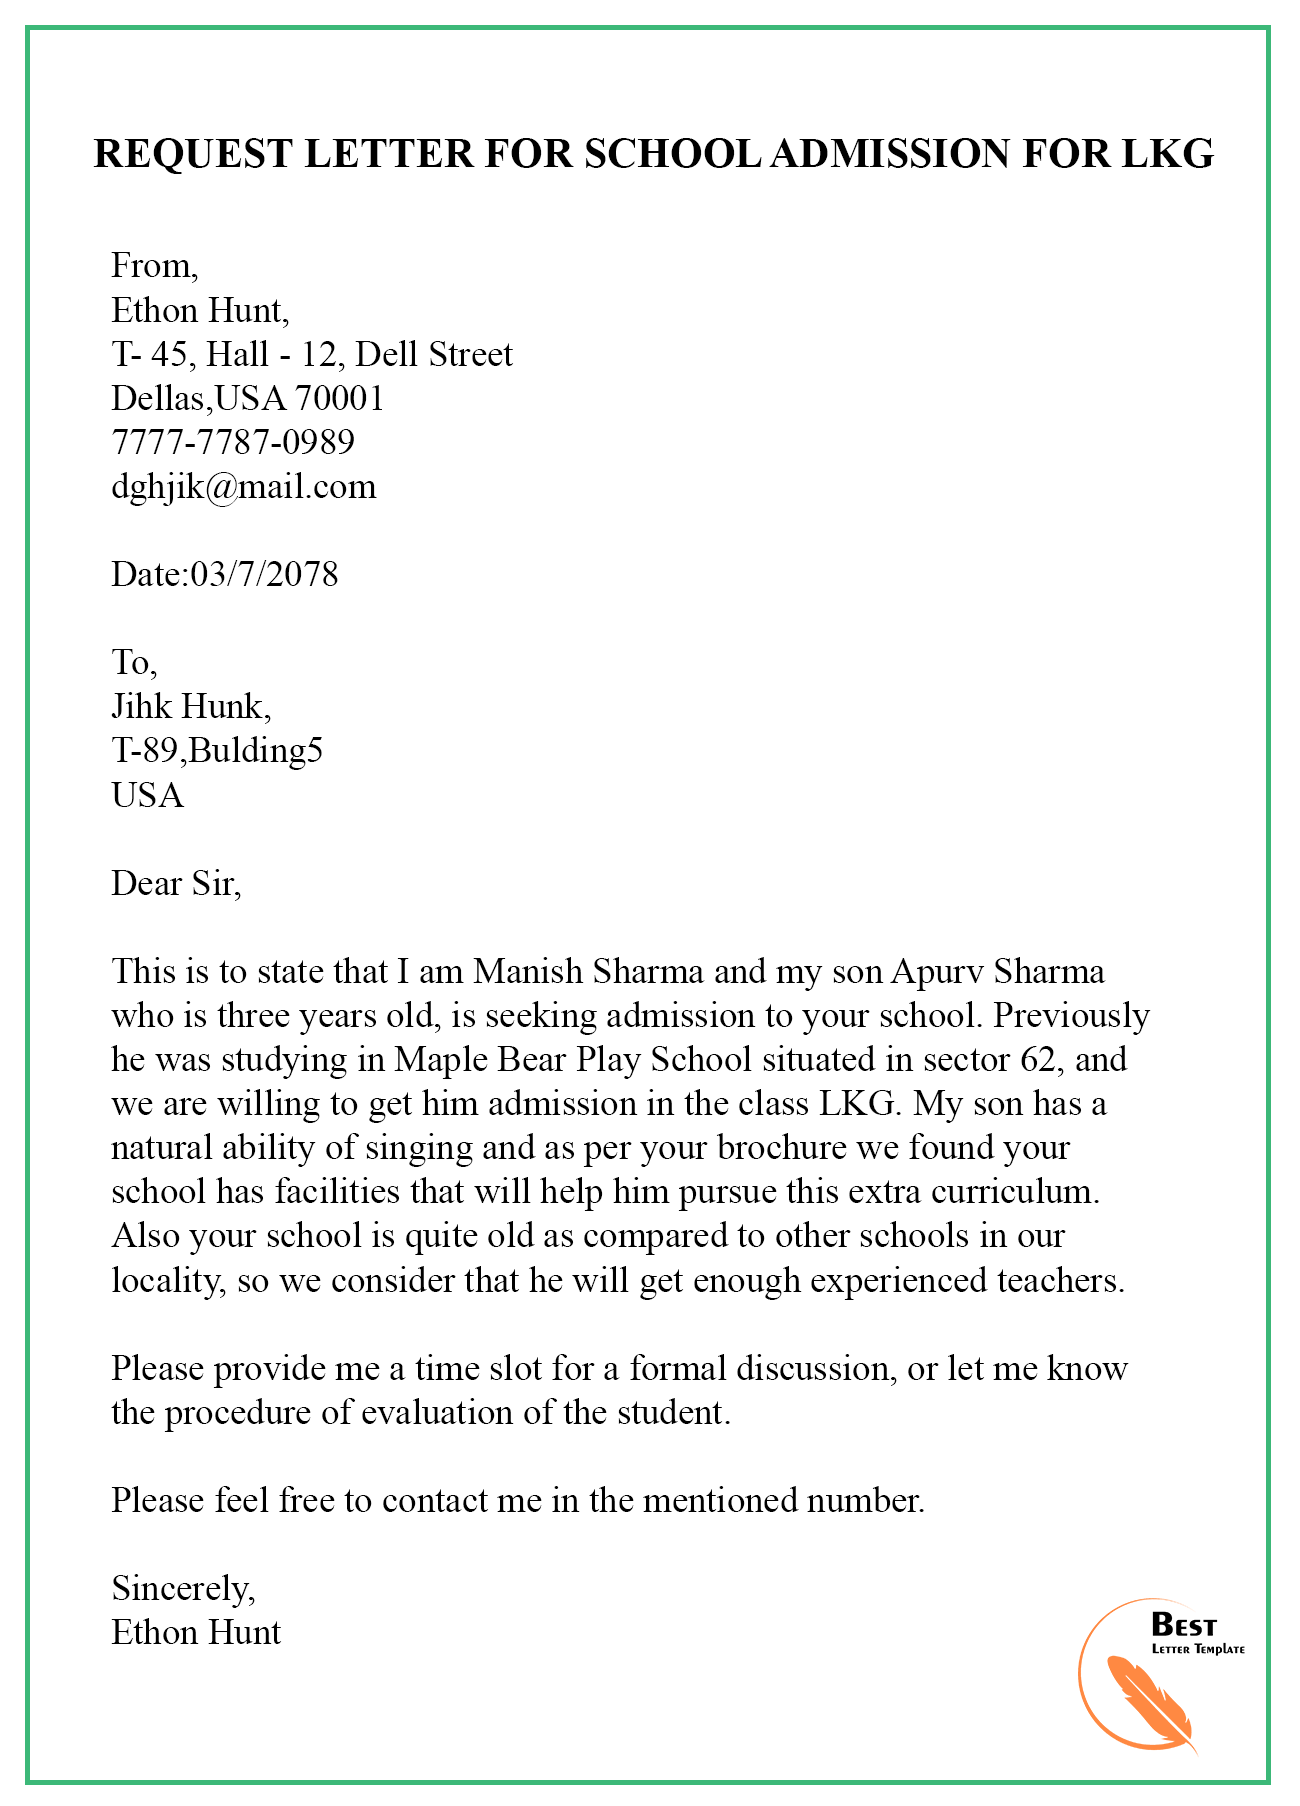 Letter to college admissions